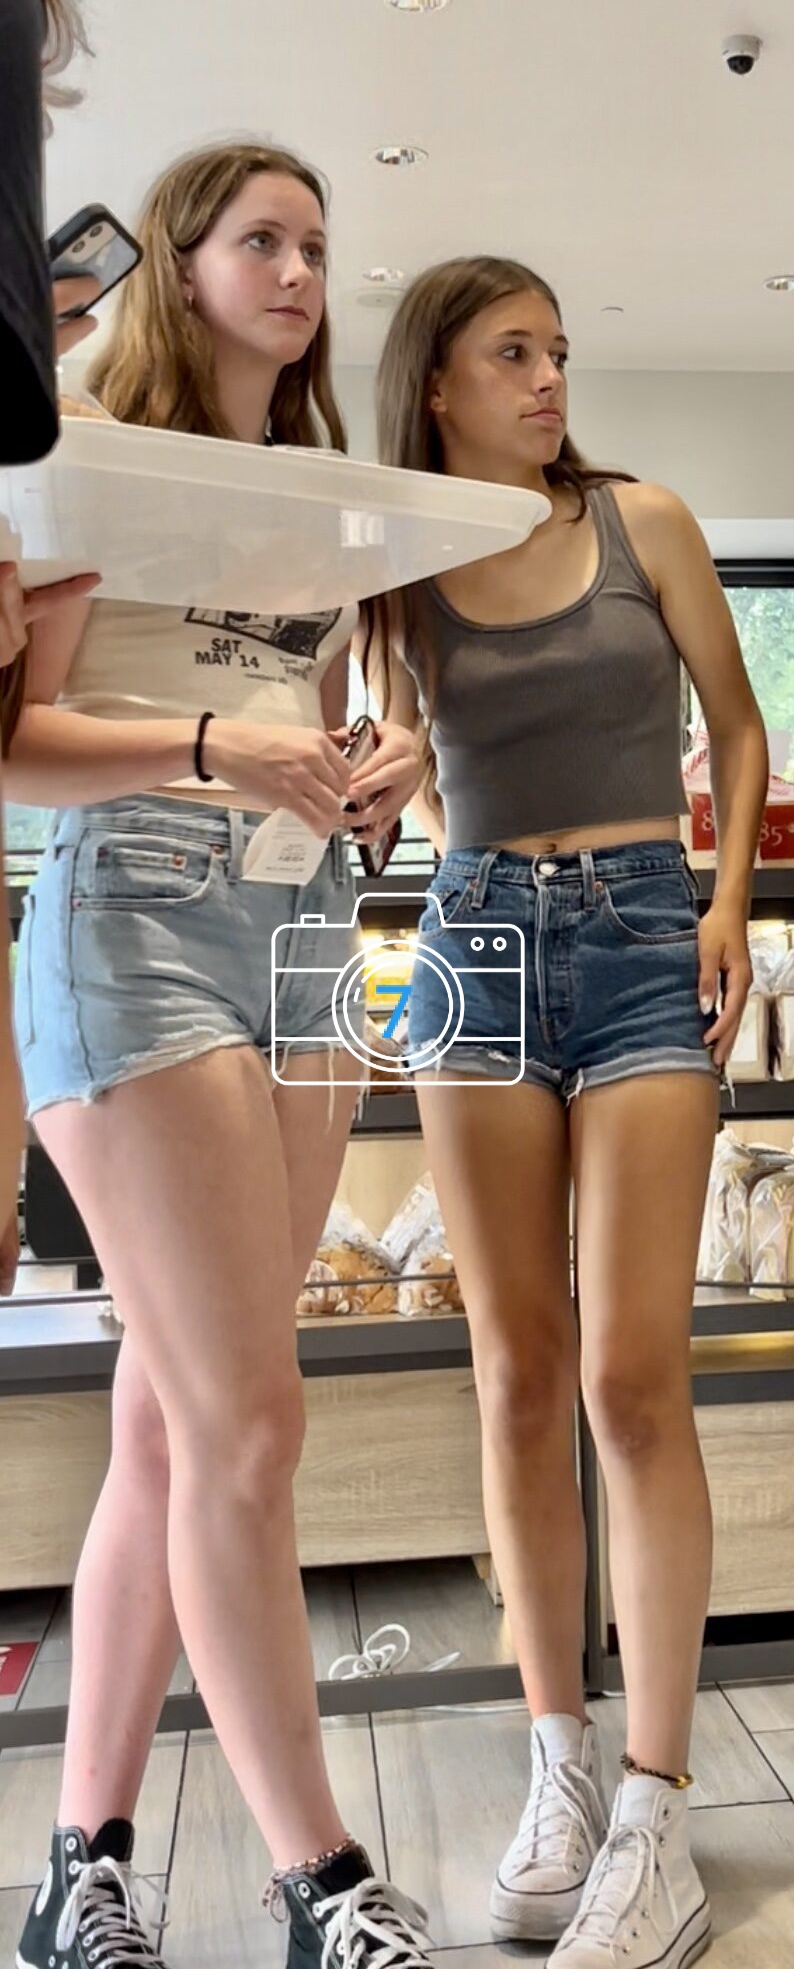 Tight jeans and shorts candid teens